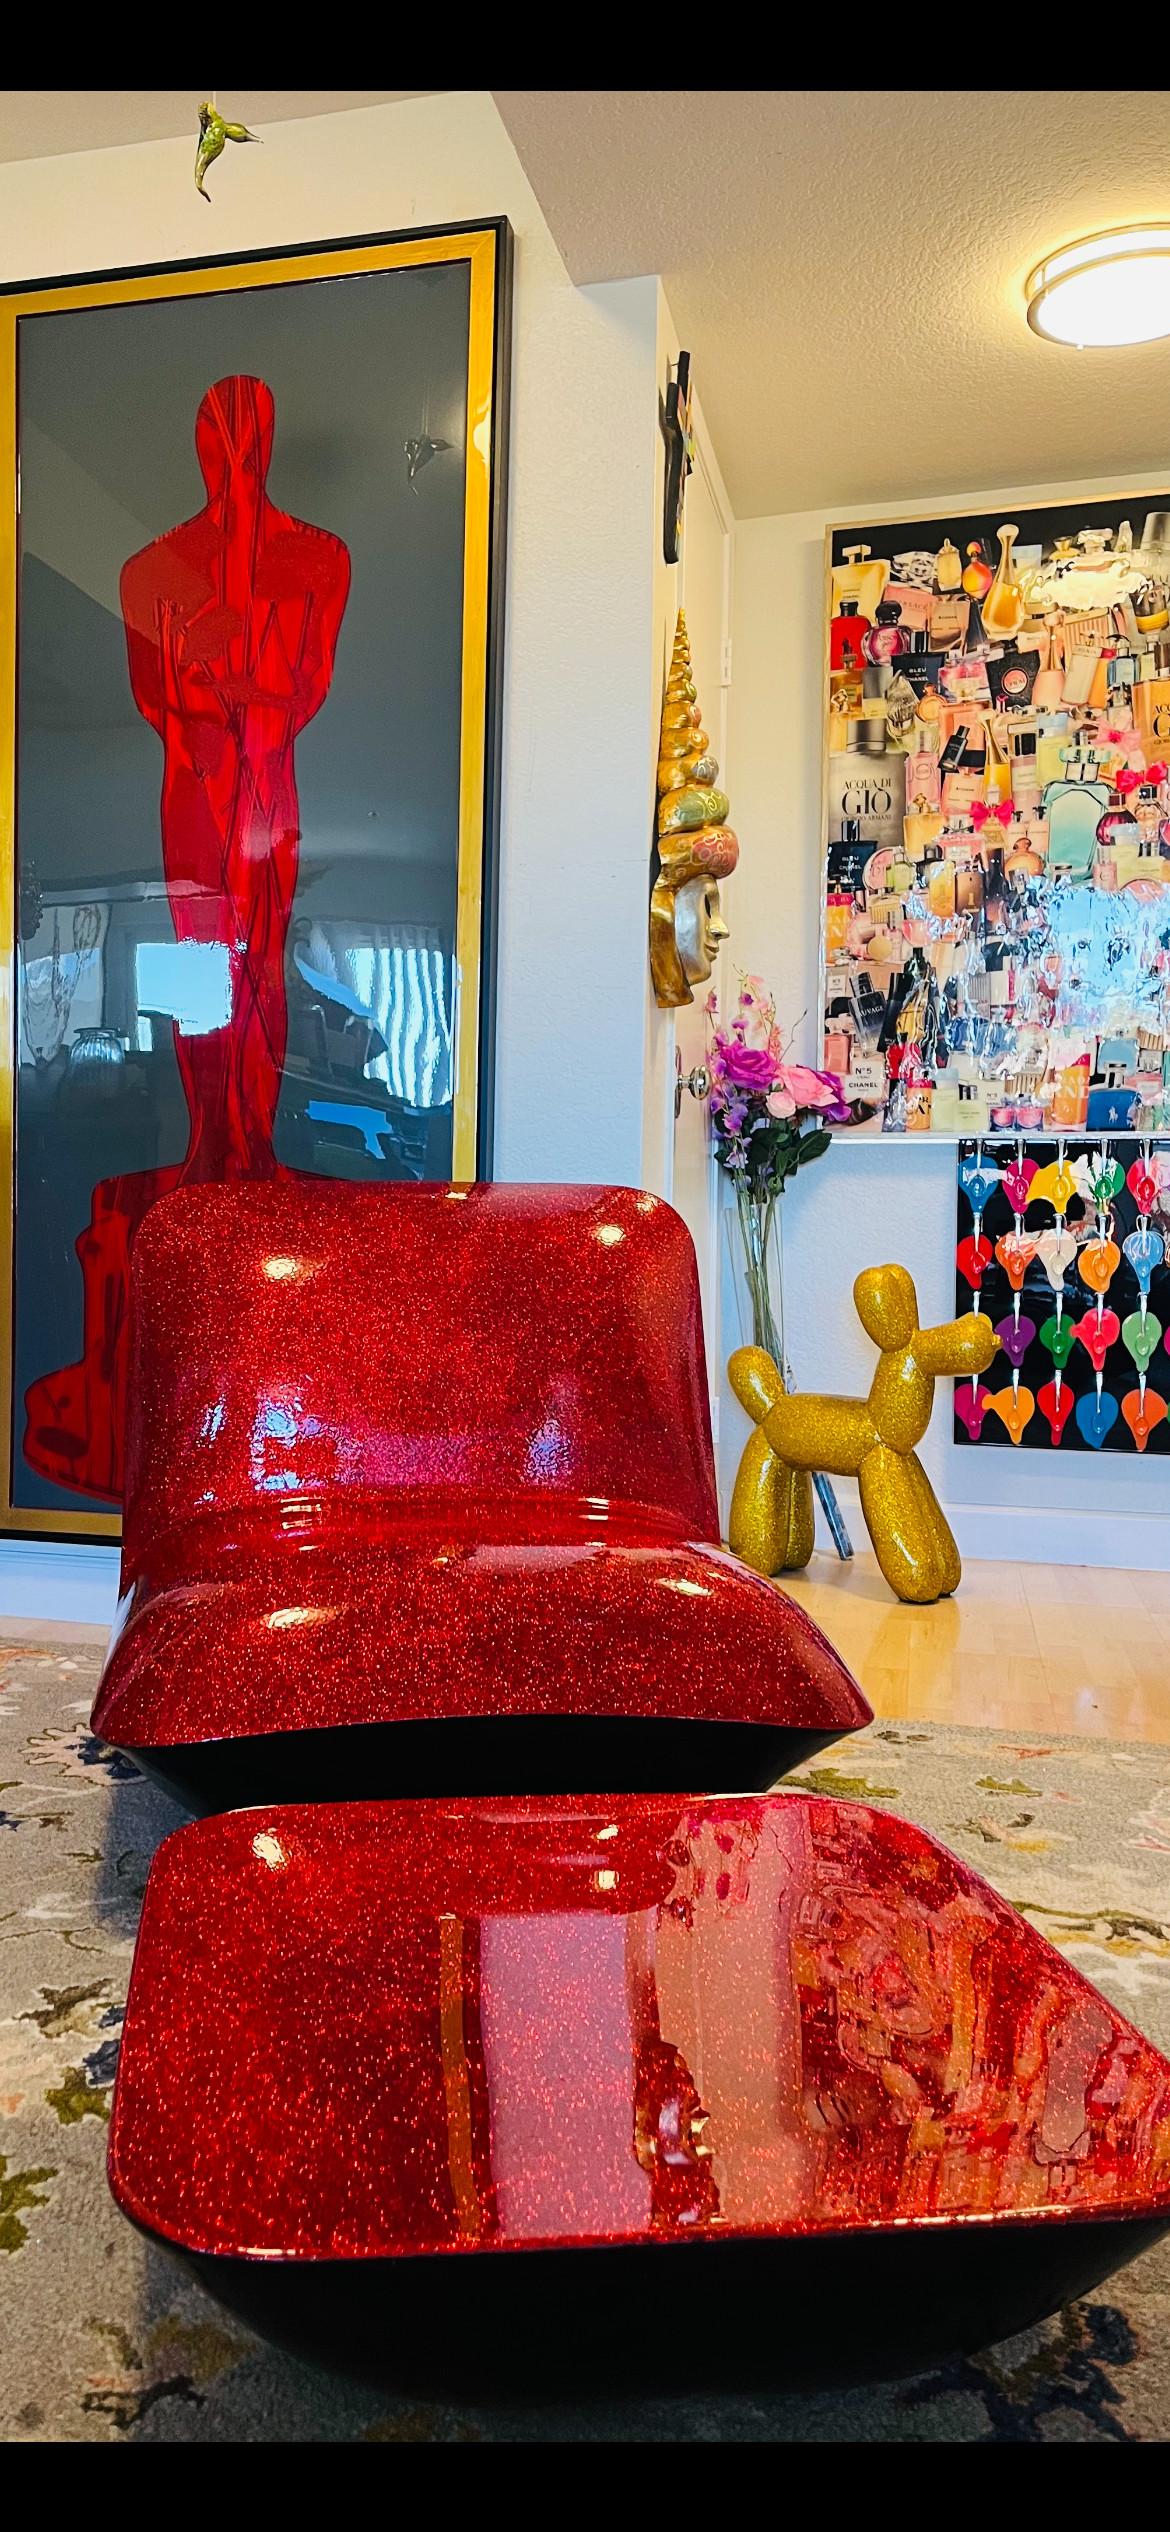 HARD CANDY GLITTER CHAIR WITH OTTOMAN I (One Of a Kind Functional Art) 4